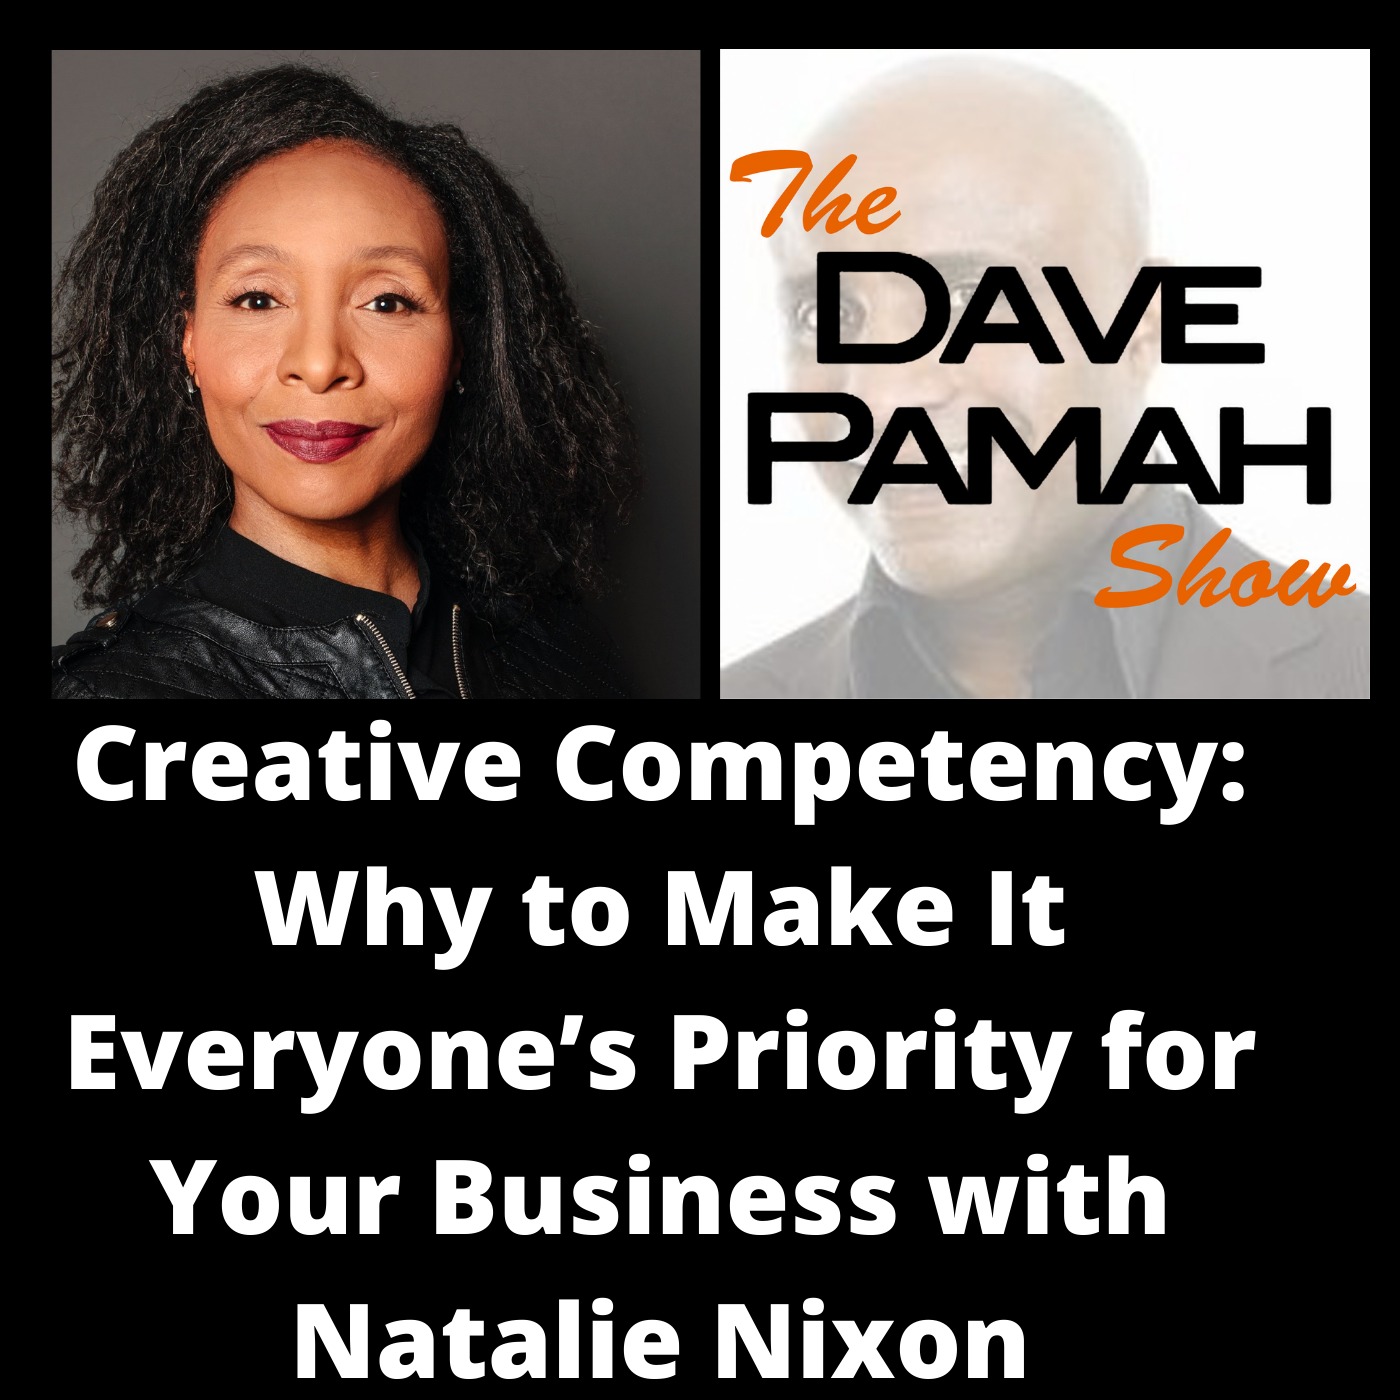 Creative Competency: Why to Make It Everyone’s Priority for Your Business with Natalie Nixon